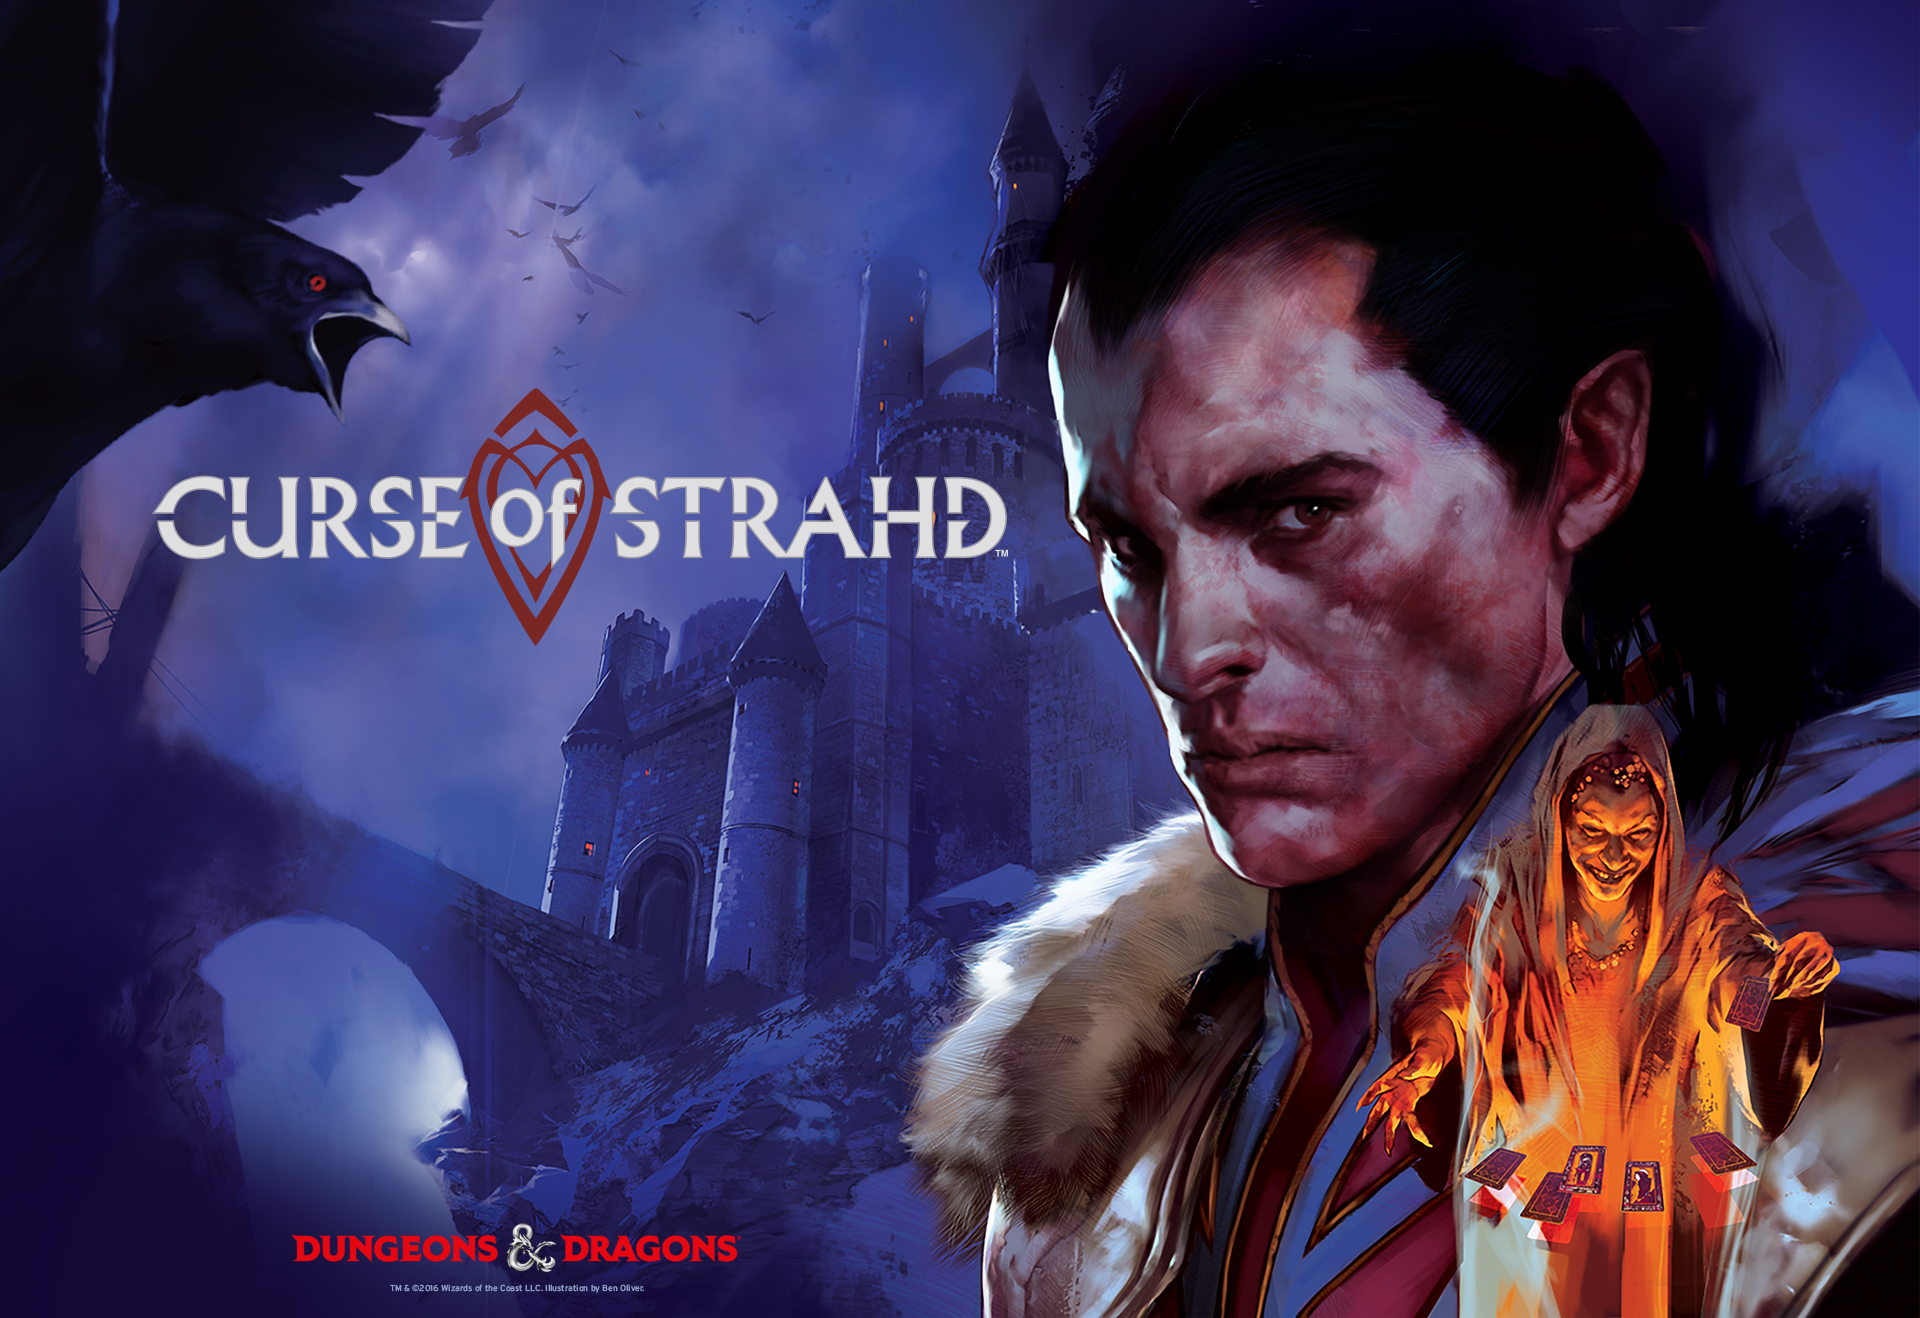 6 Fang-tastic Additions for Curse of Strahd - Roll20 Blog